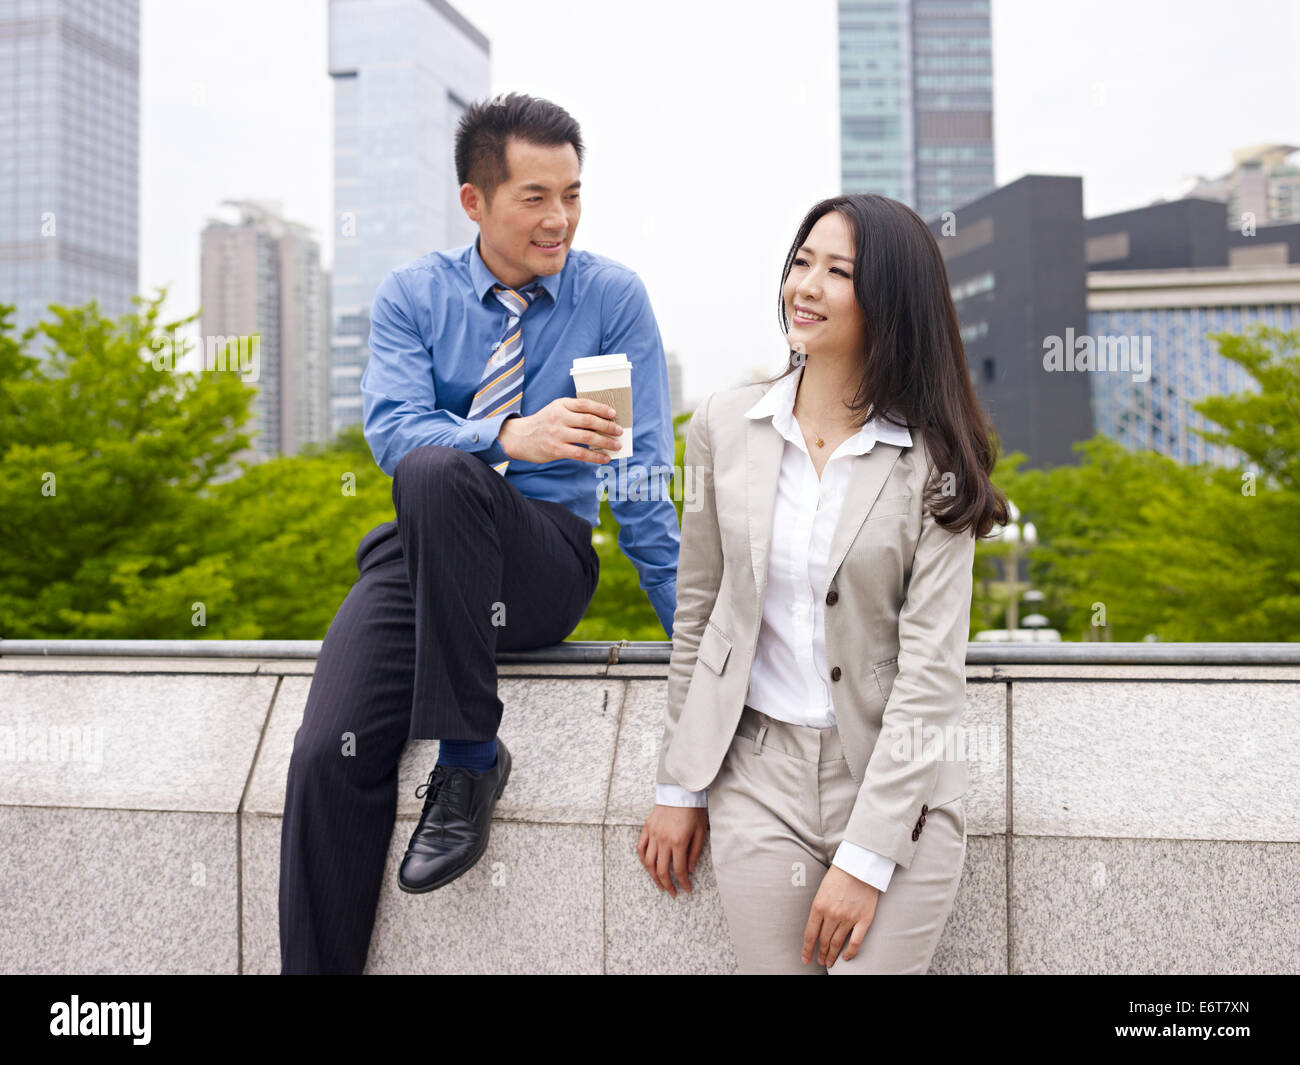 asian businesspeople Stock Photo